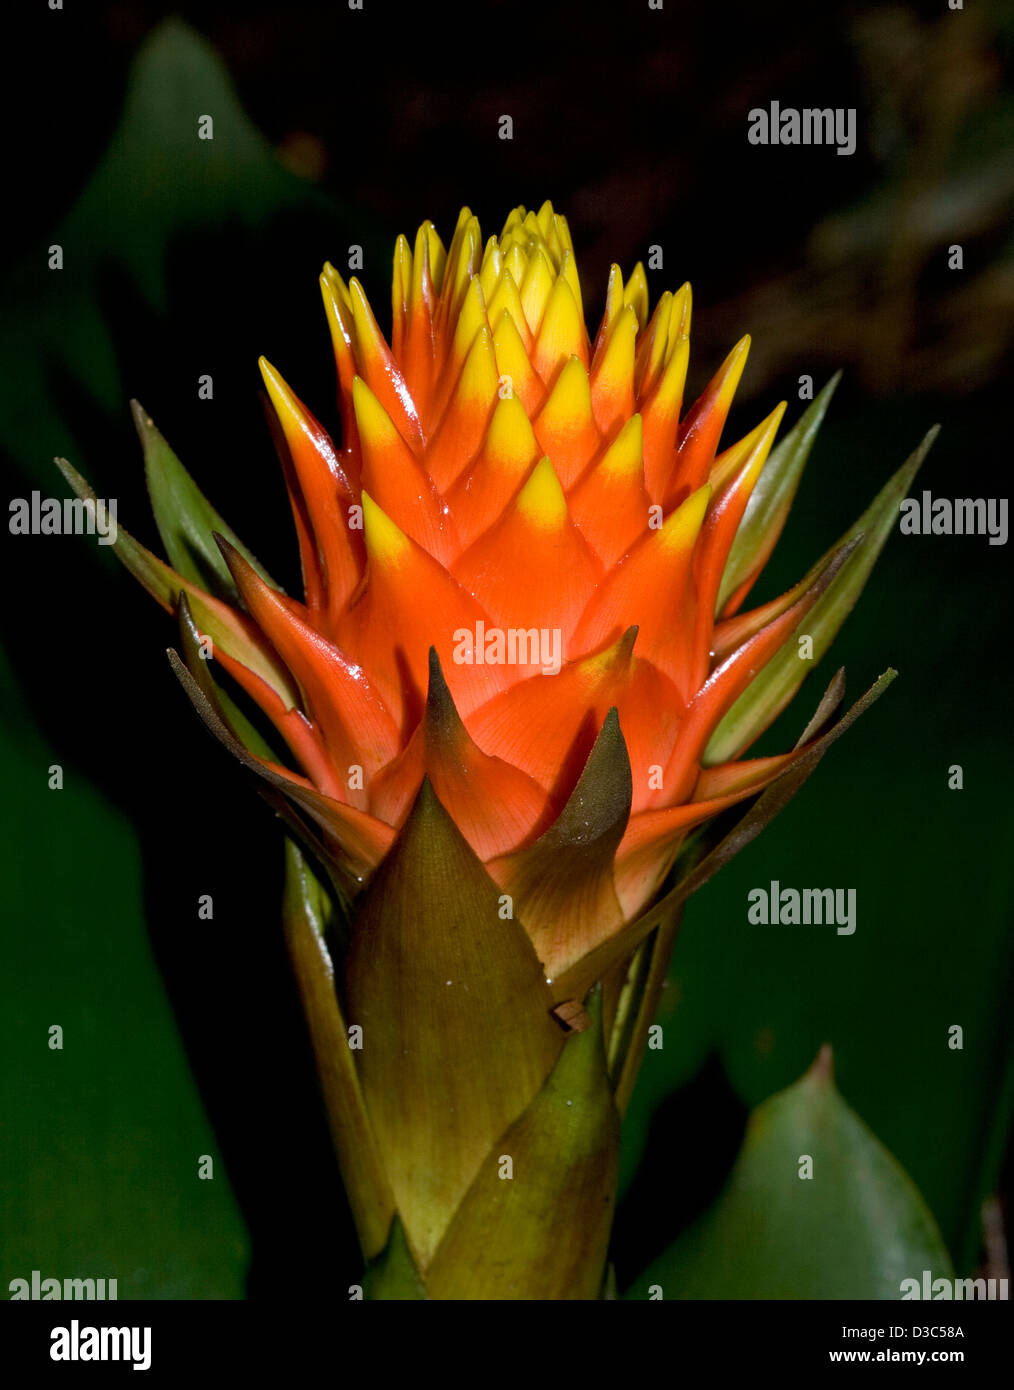 Spectacular large and gaudy orange and yellow flower (bracts)  of Bromeliad - Guzmania conifera - against a dark background Stock Photo